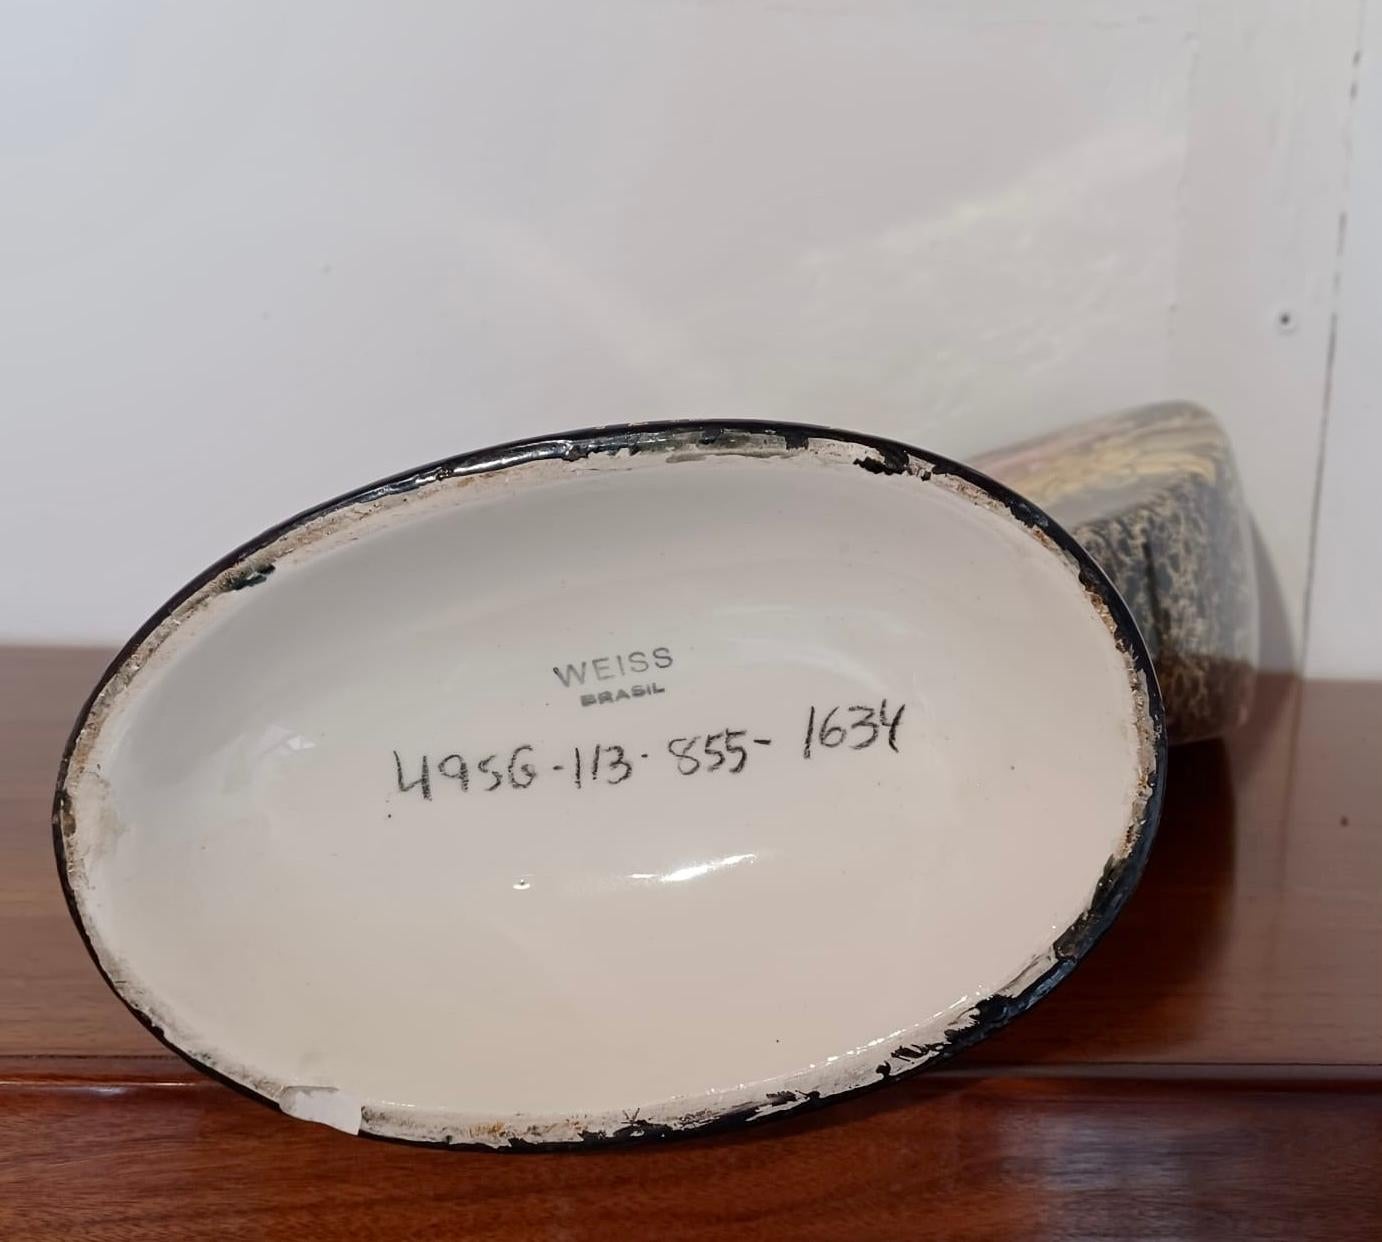 20th Century Weiss. Modern Brazilian ceramics, c. 1950 Signed under the base: Weiss Brasil For Sale